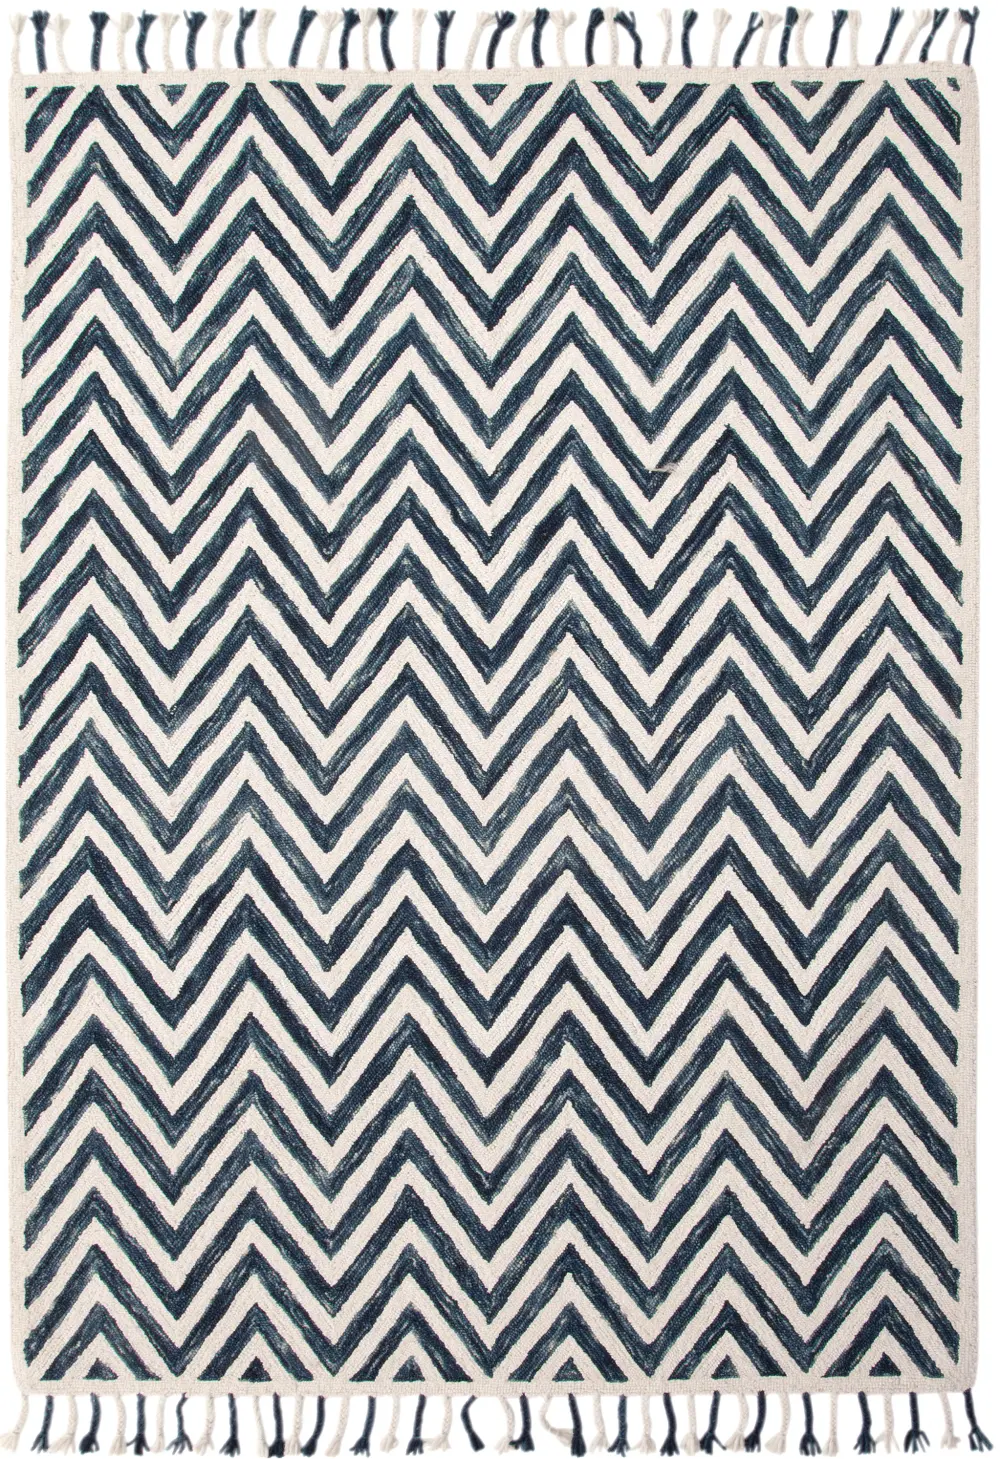 8 x 10 Large Chevron White and Navy Blue Rug - Lily-1